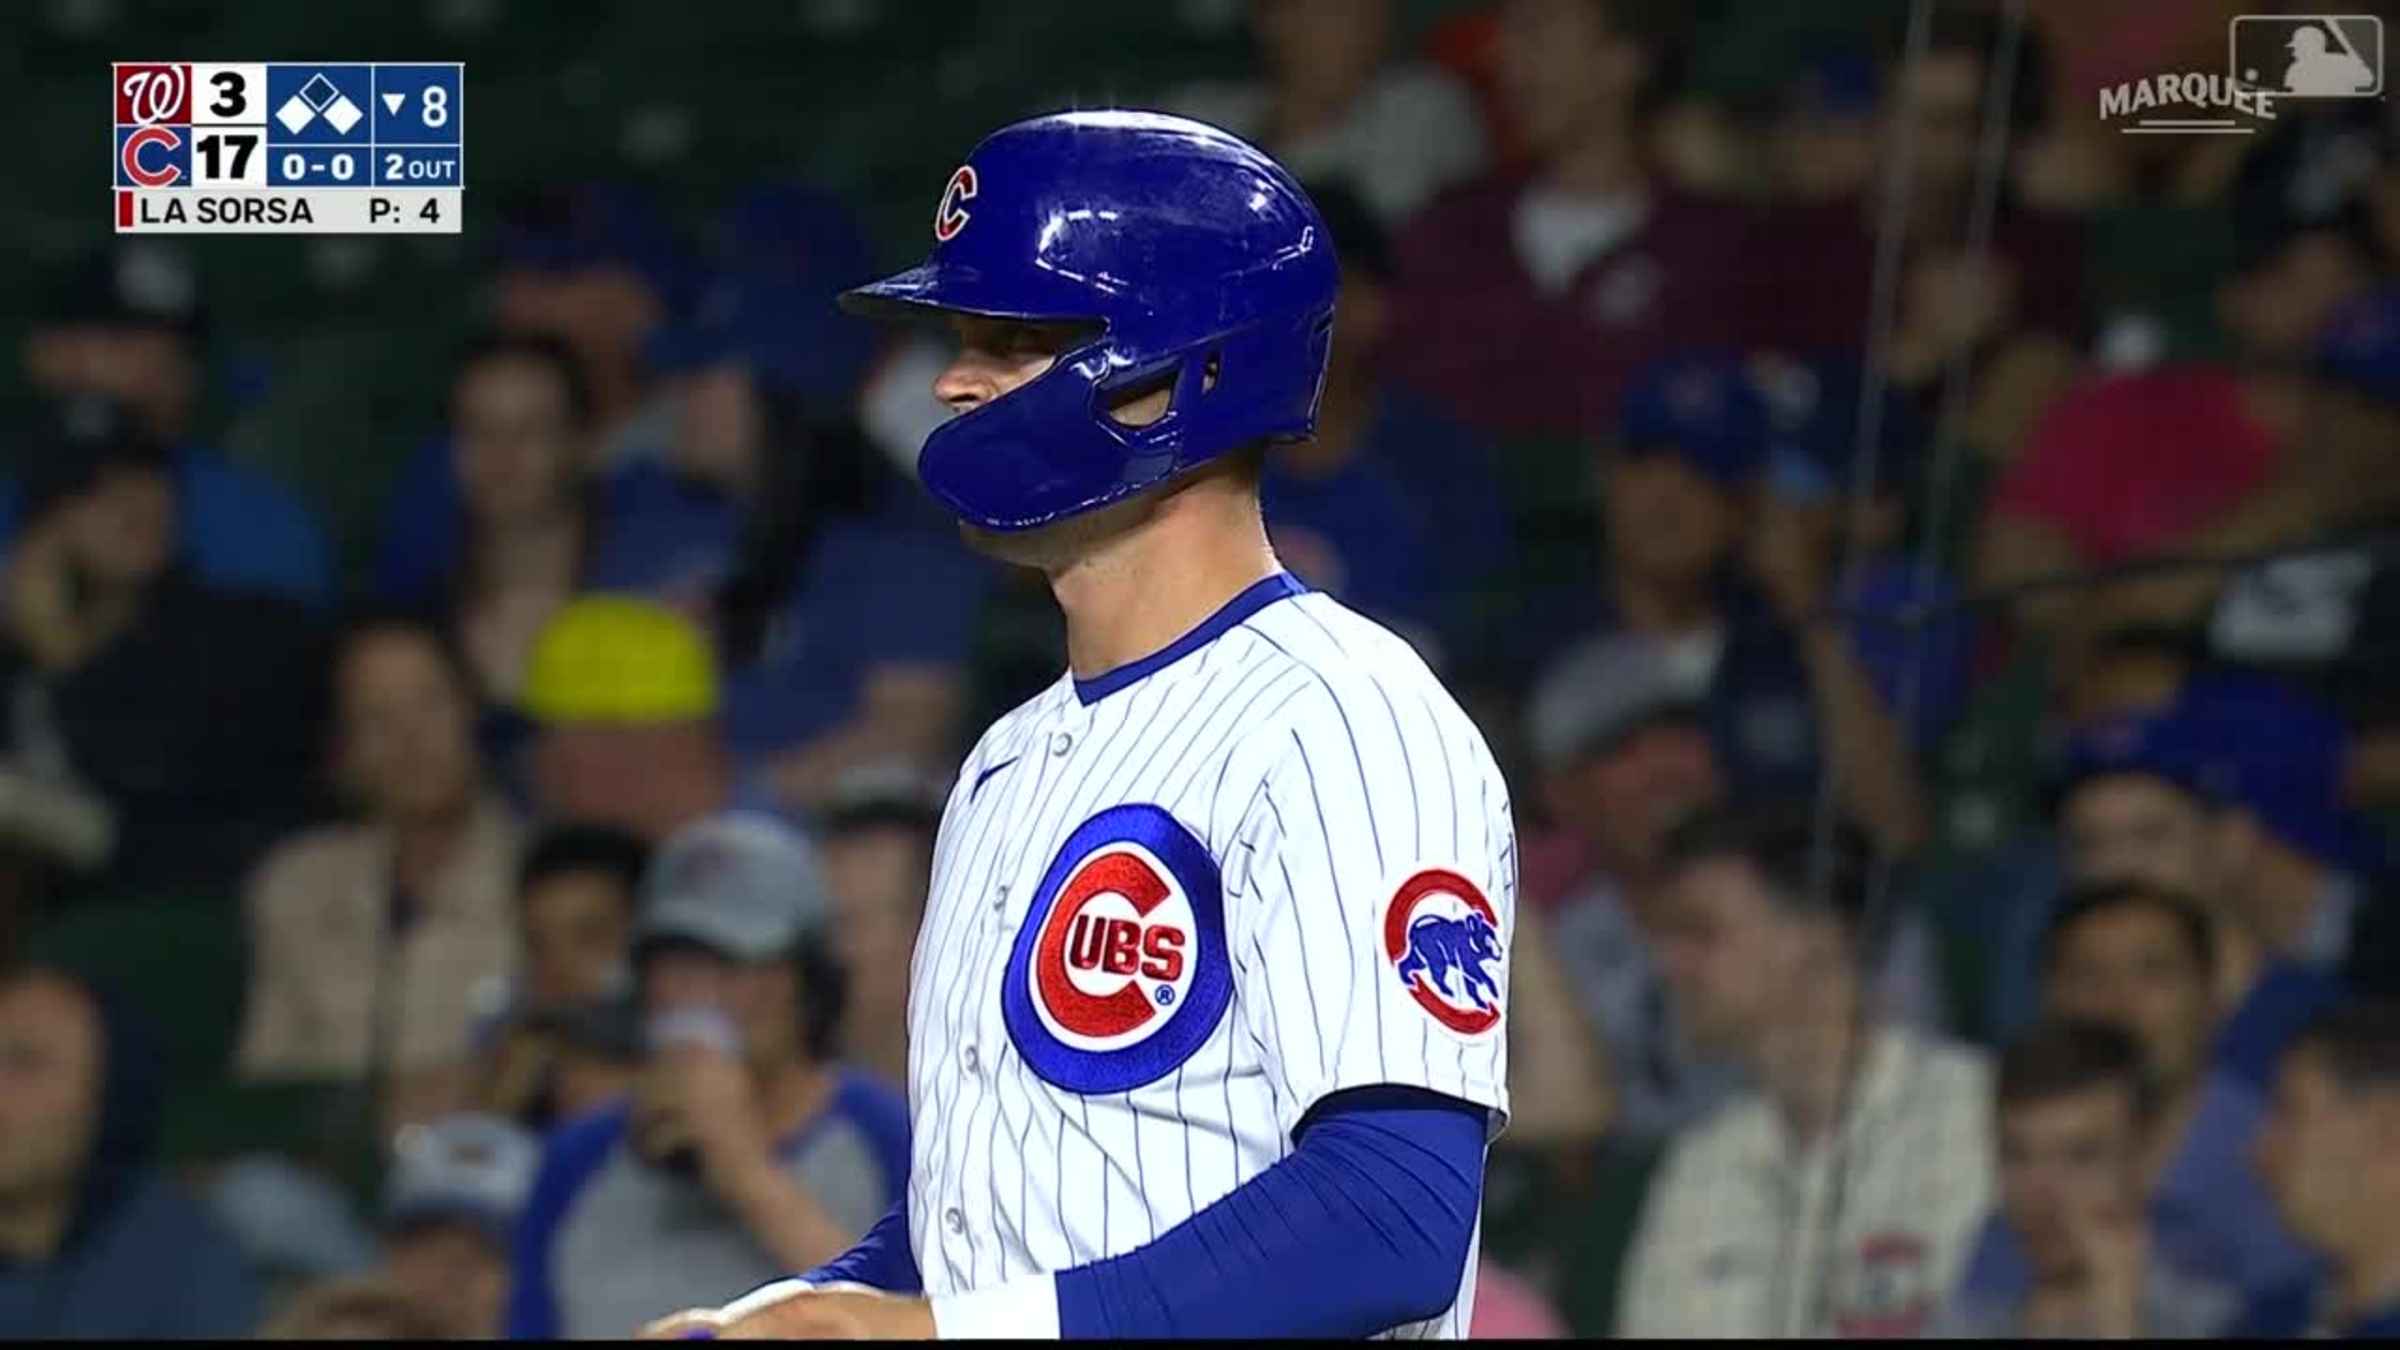 MLB Gameday Nationals 3, Cubs 17 Final Score (07/18/2023)